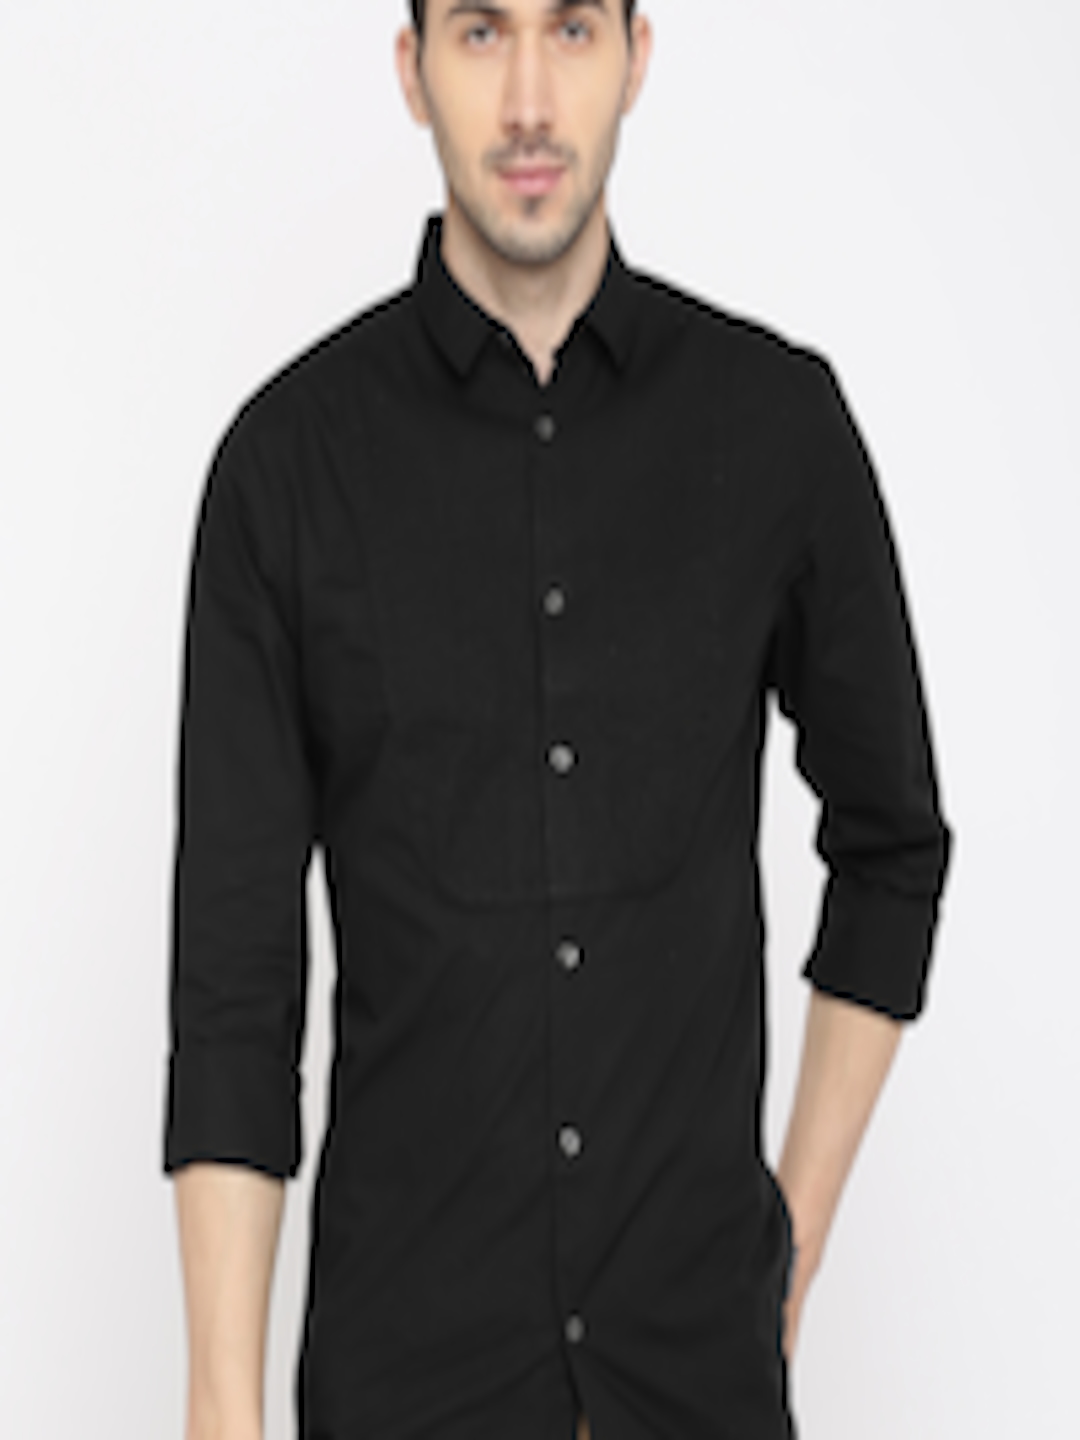 Buy French Connection Black Casual Shirt - Shirts for Men 1846113 | Myntra